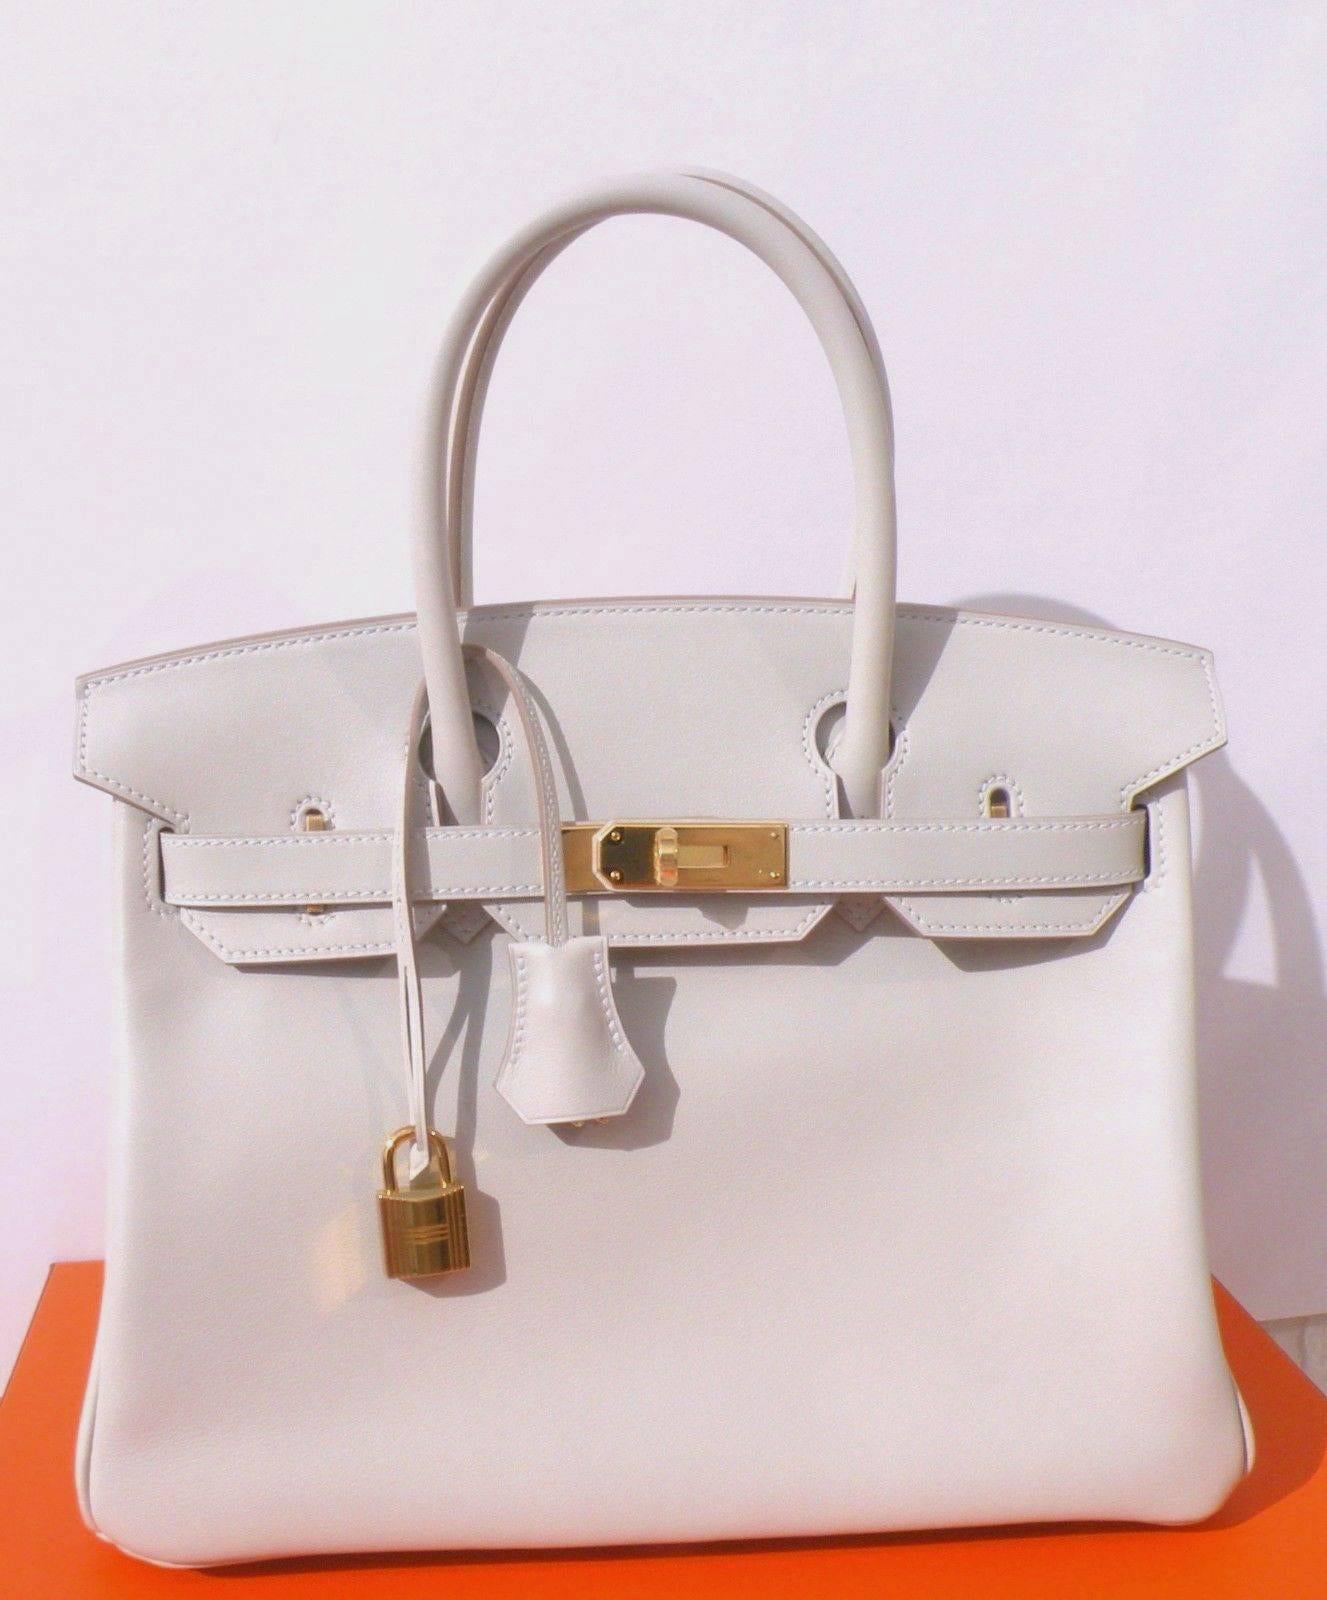 Hermès
30cm Birkin Bag

Silver and Gold is there anything better for the Holidays!
GRIS PERLE WITH GOLD

THE COLOR COMBINATION CANT BE BEAT!





Leather: Swift

Hardware: GOLD

Lined in Chevre

X STAMP

As always, the auction will include an